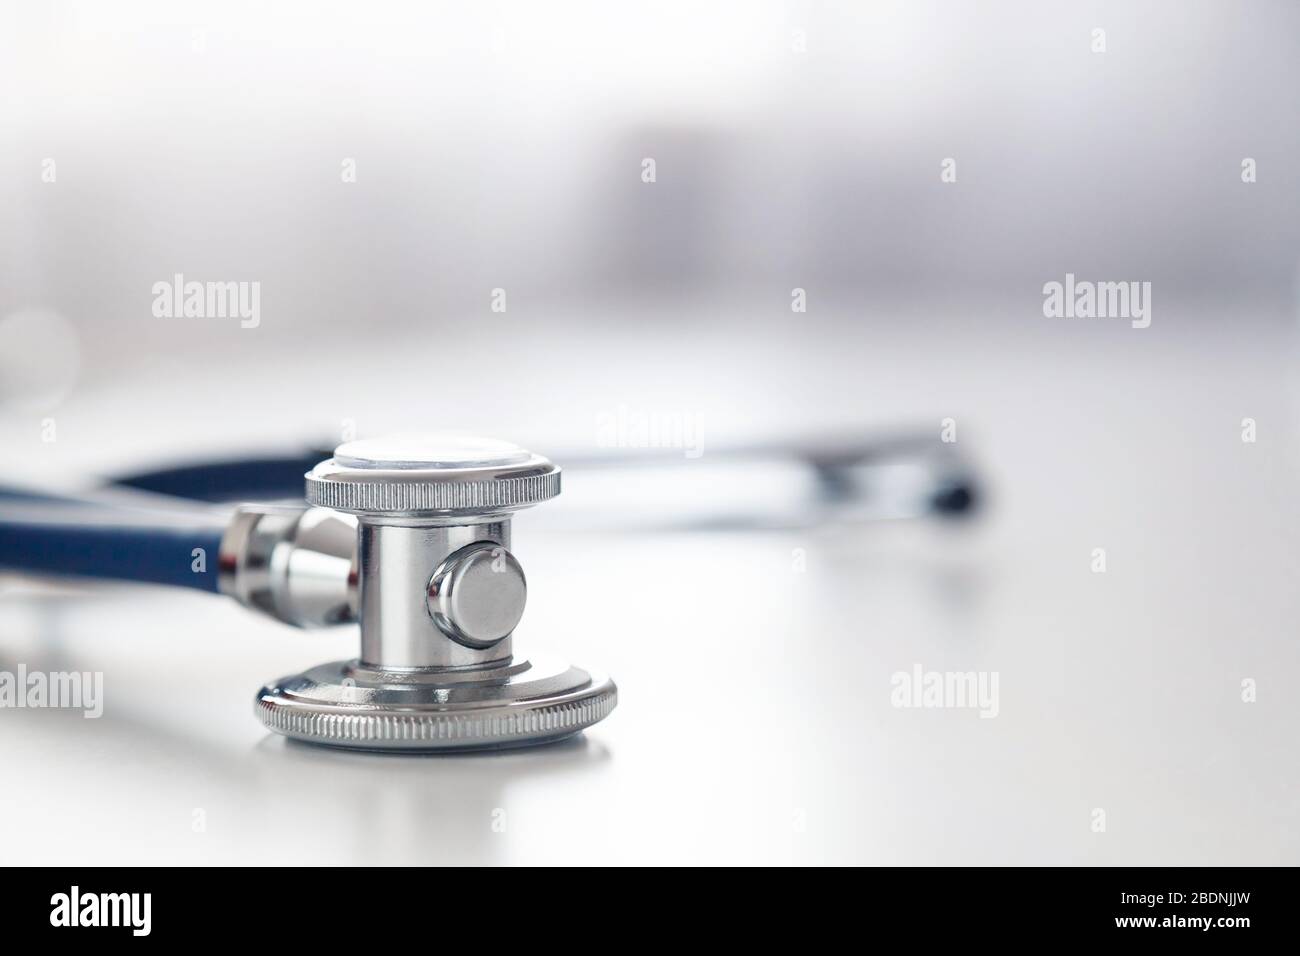 Medical stethoscope or phonendoscope on white table. Acoustic medical device for auscultation Stock Photo